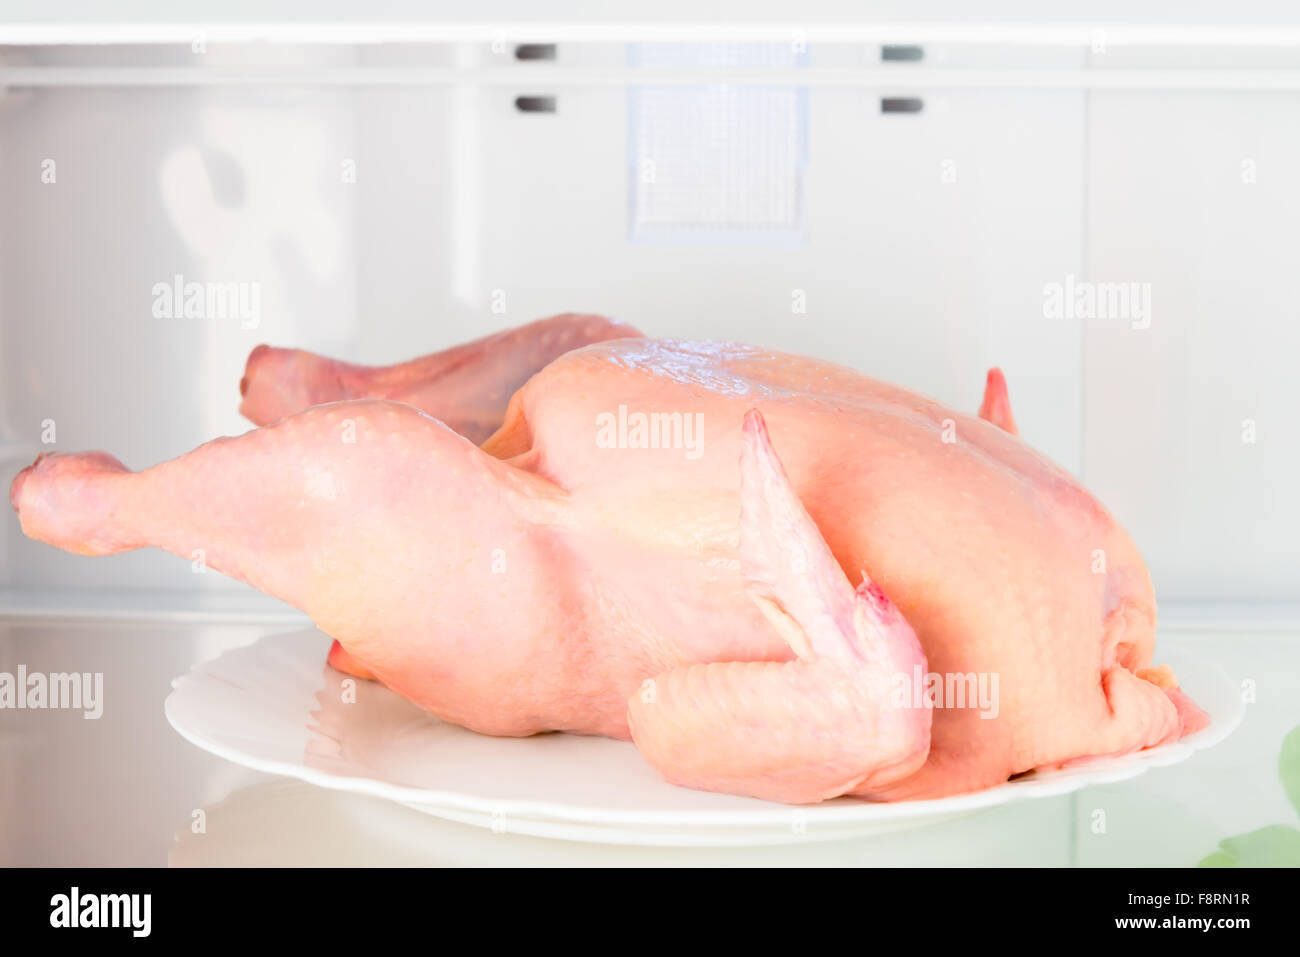 raw chicken on the shelf of the refrigerator on a plate closeup Stock Photo